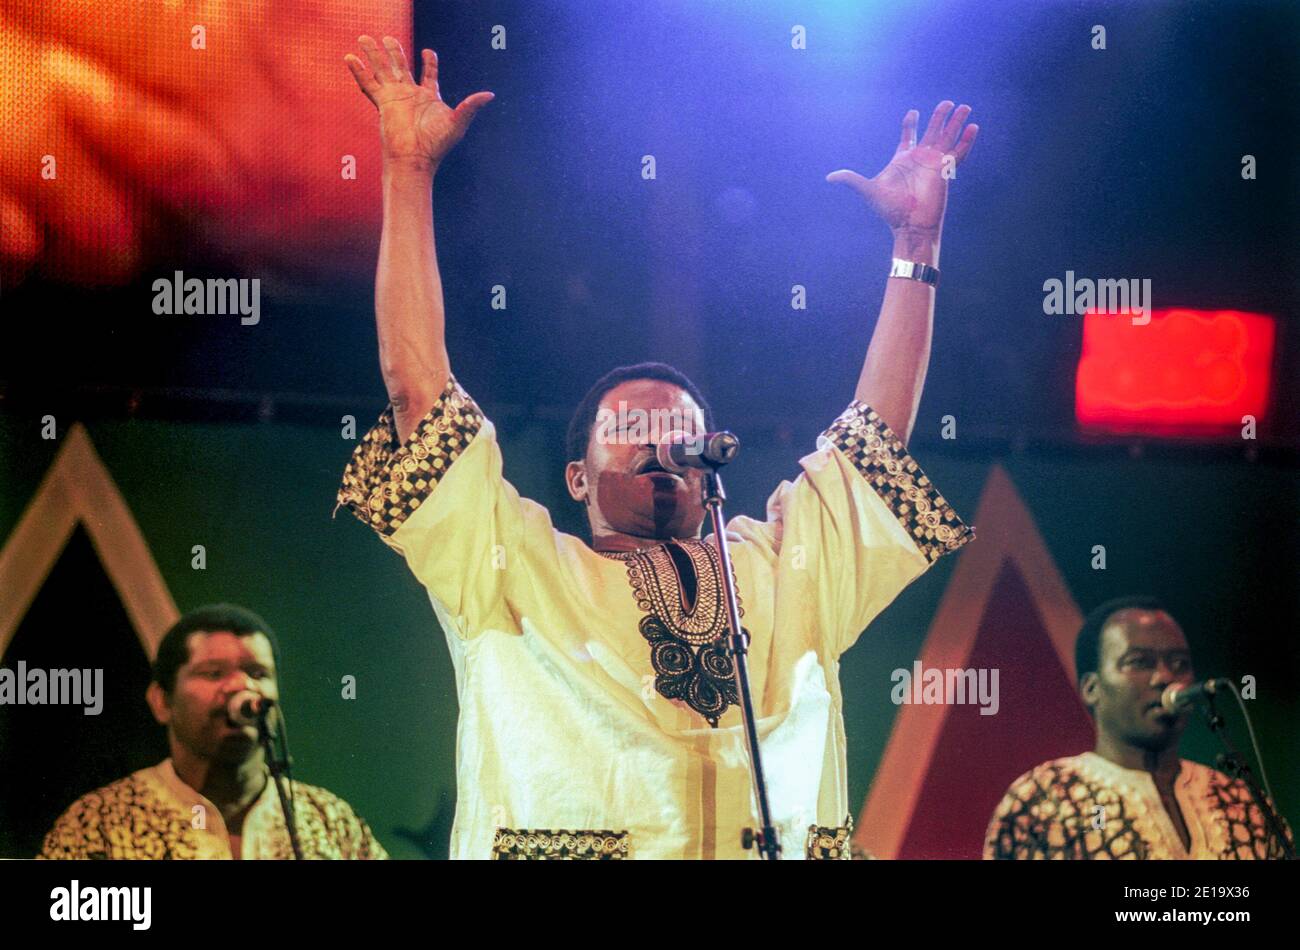 Joseph Shabalala, leader of Ladysmith Black Mambazo, performs with the group at Celebrate South Africa Freedom Day Concert On The Square, London, UK. Stock Photo